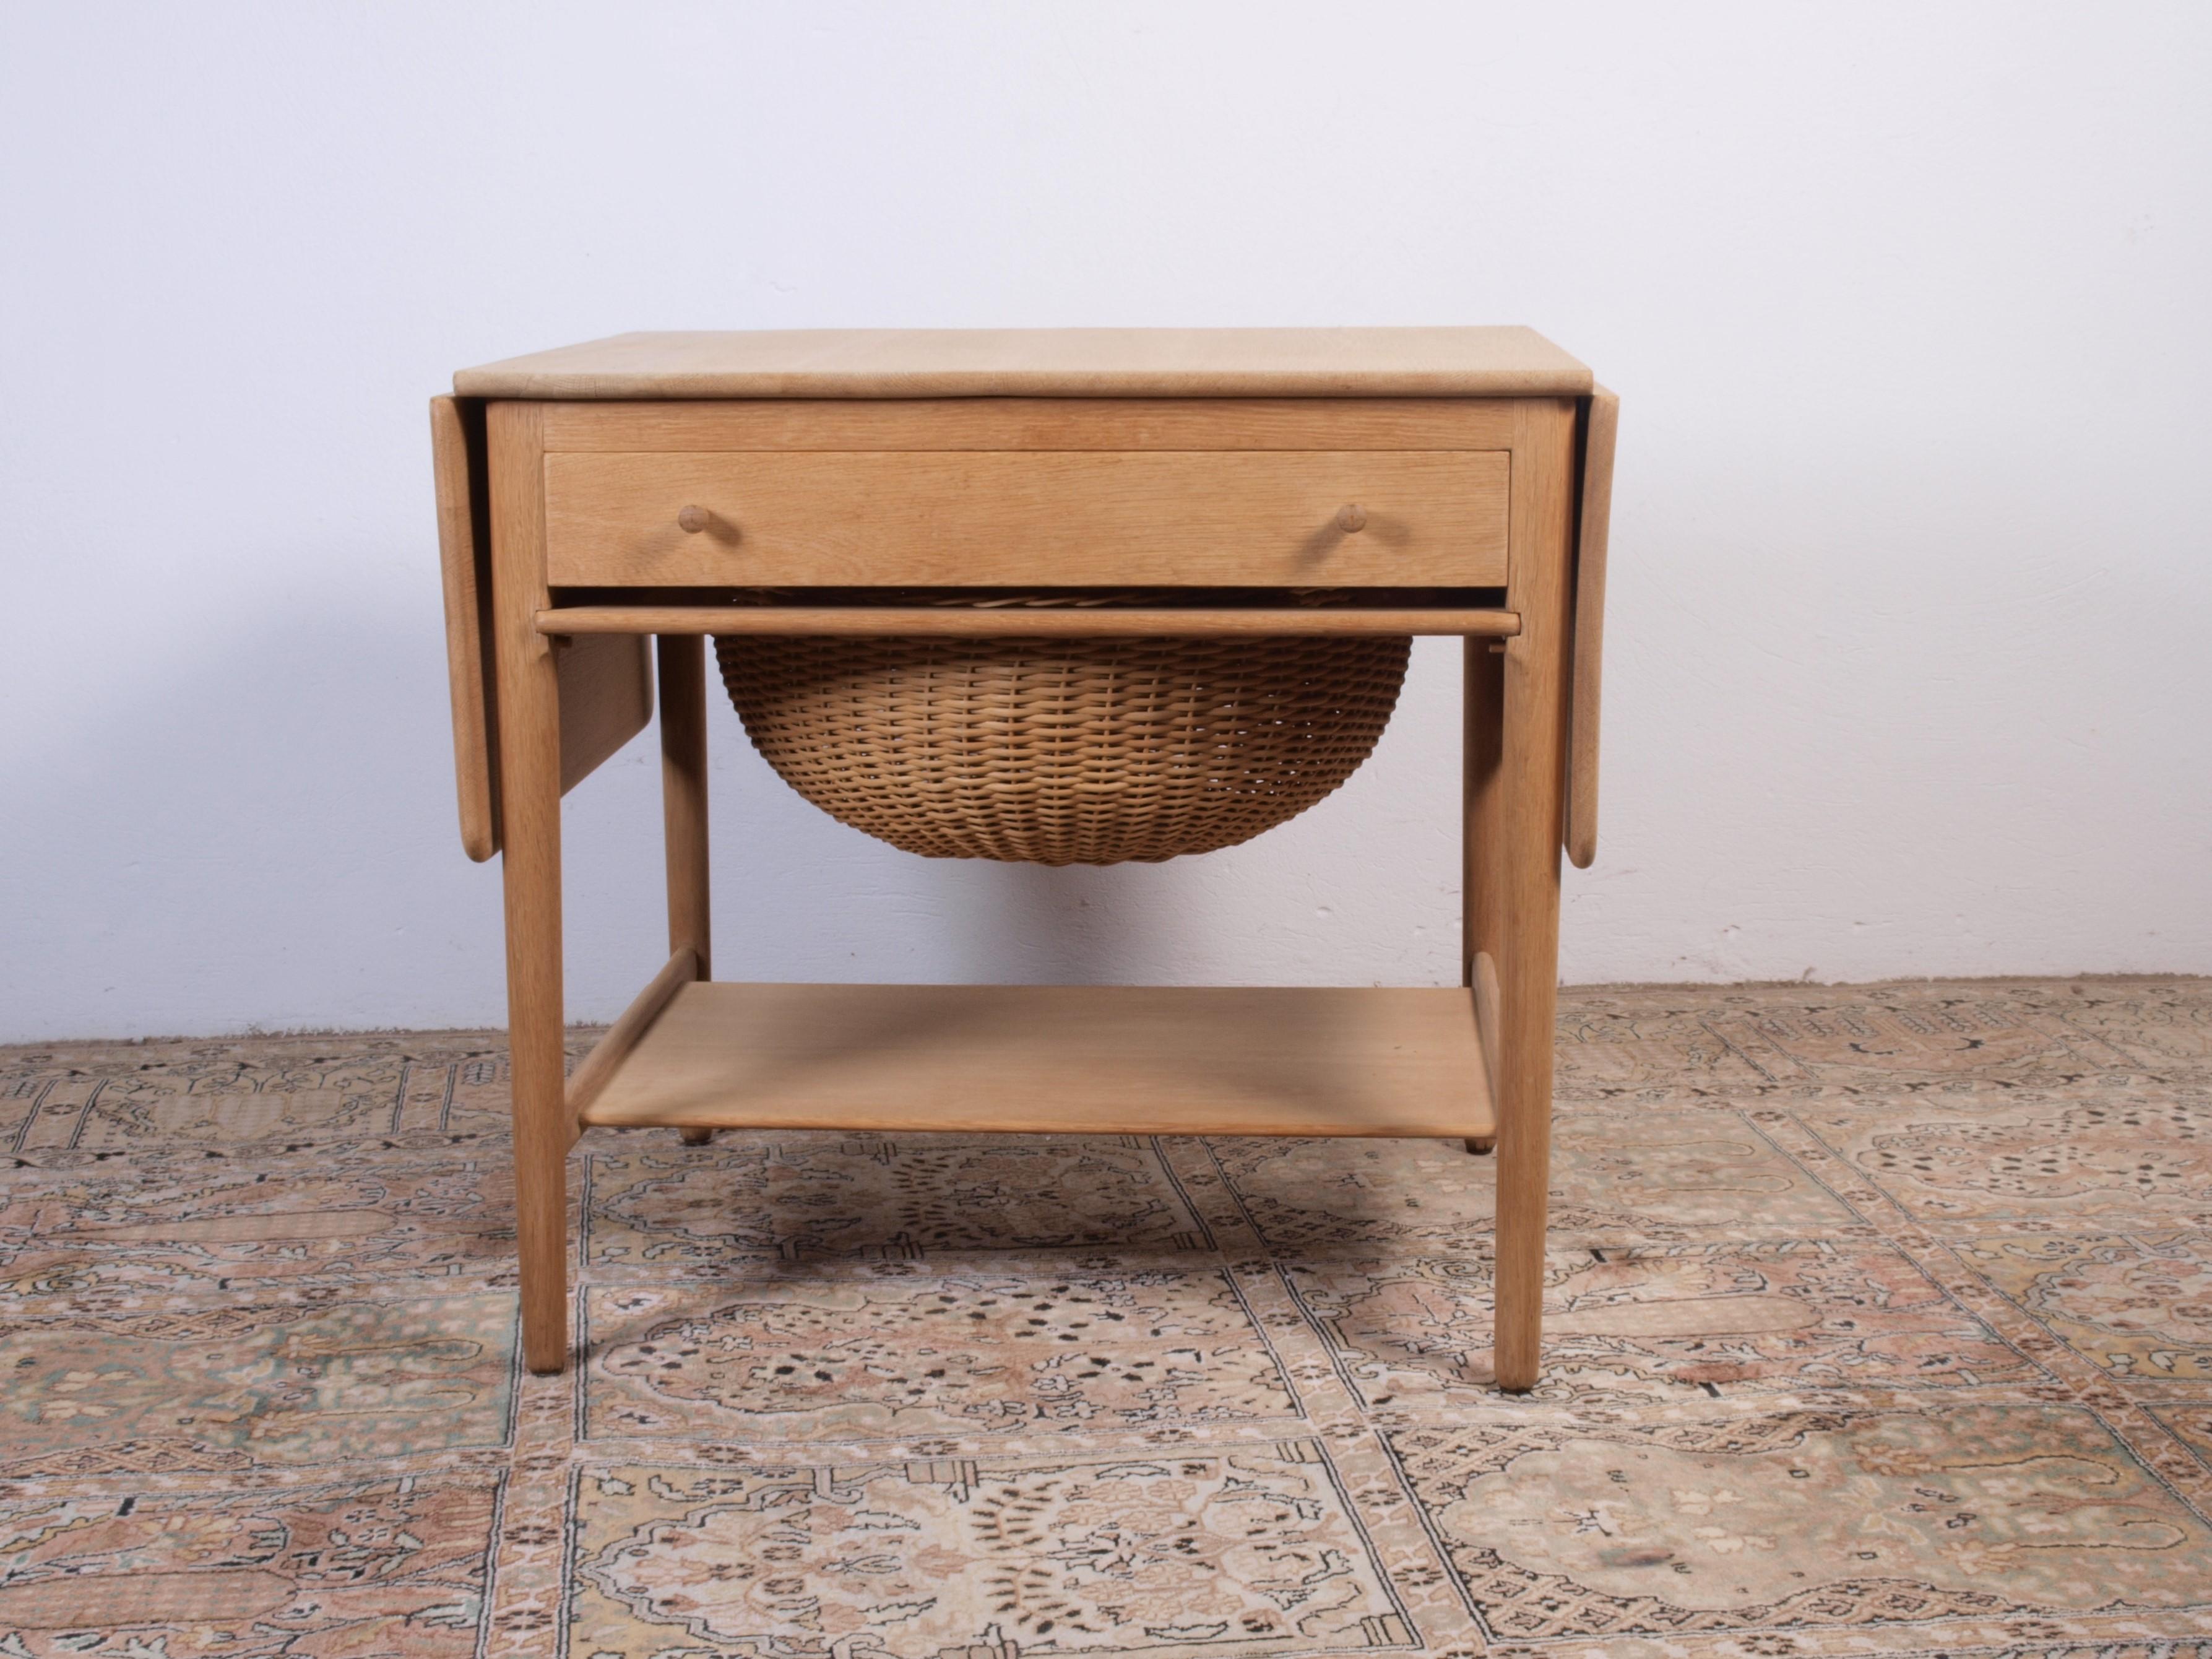 Offering a sewing table crafted from solid oak, this is the iconic Model AT33. The front of the table features a drawer with its original fittings, including holders for bobbins, and a woven wicker basket for yarn. Additionally, there's a lower